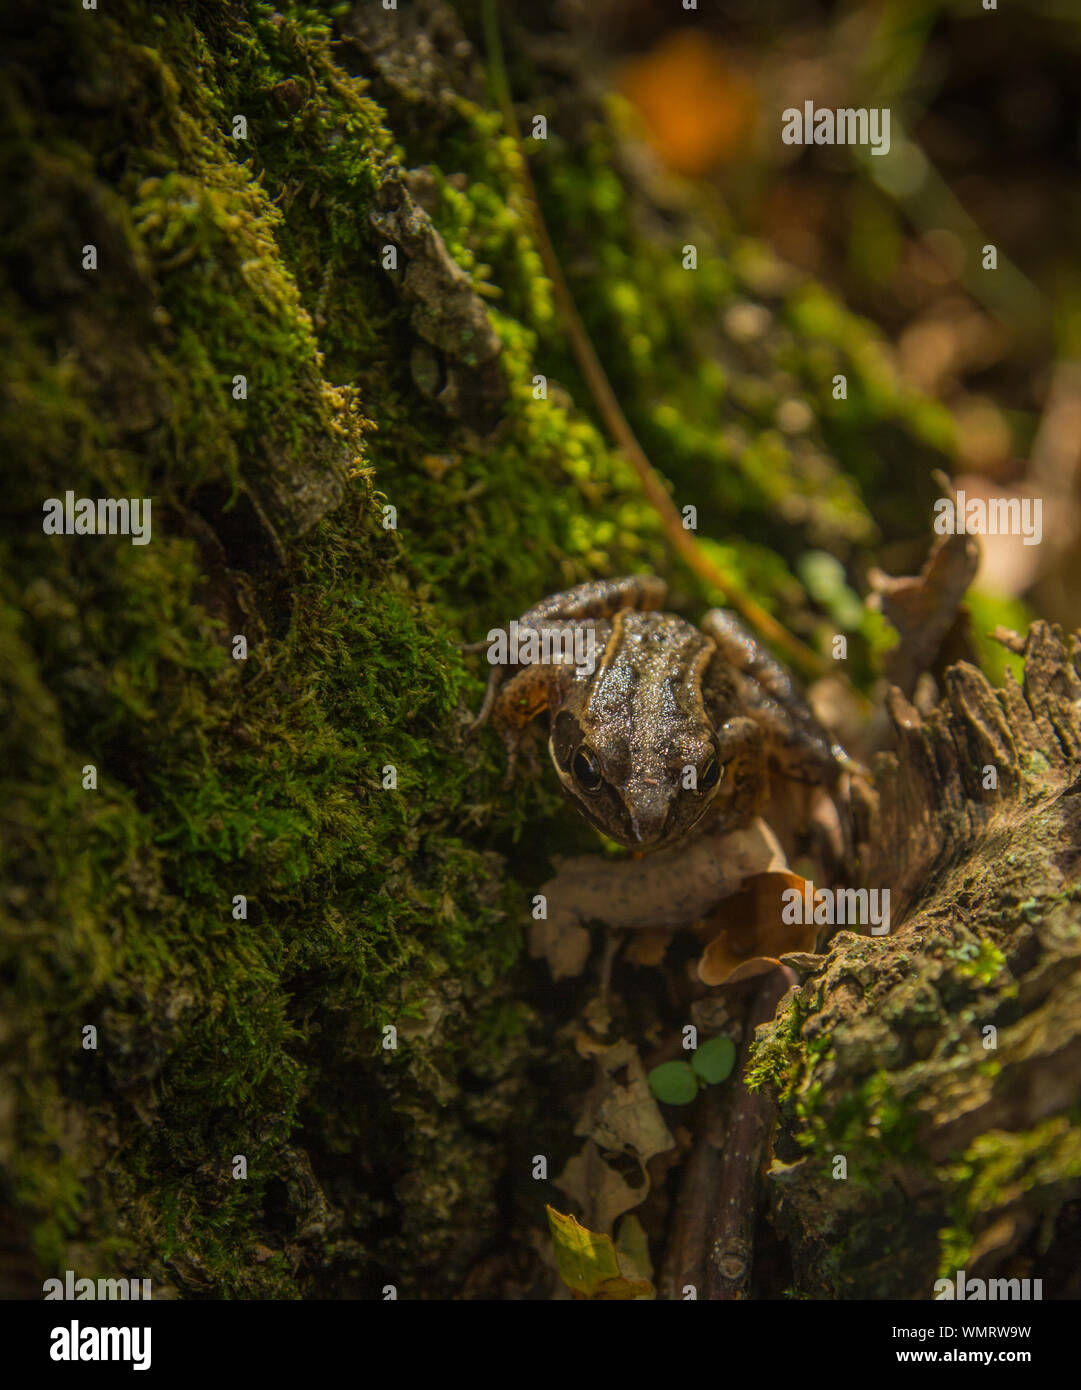 Frog on a moss covered old stump i Stock Photo